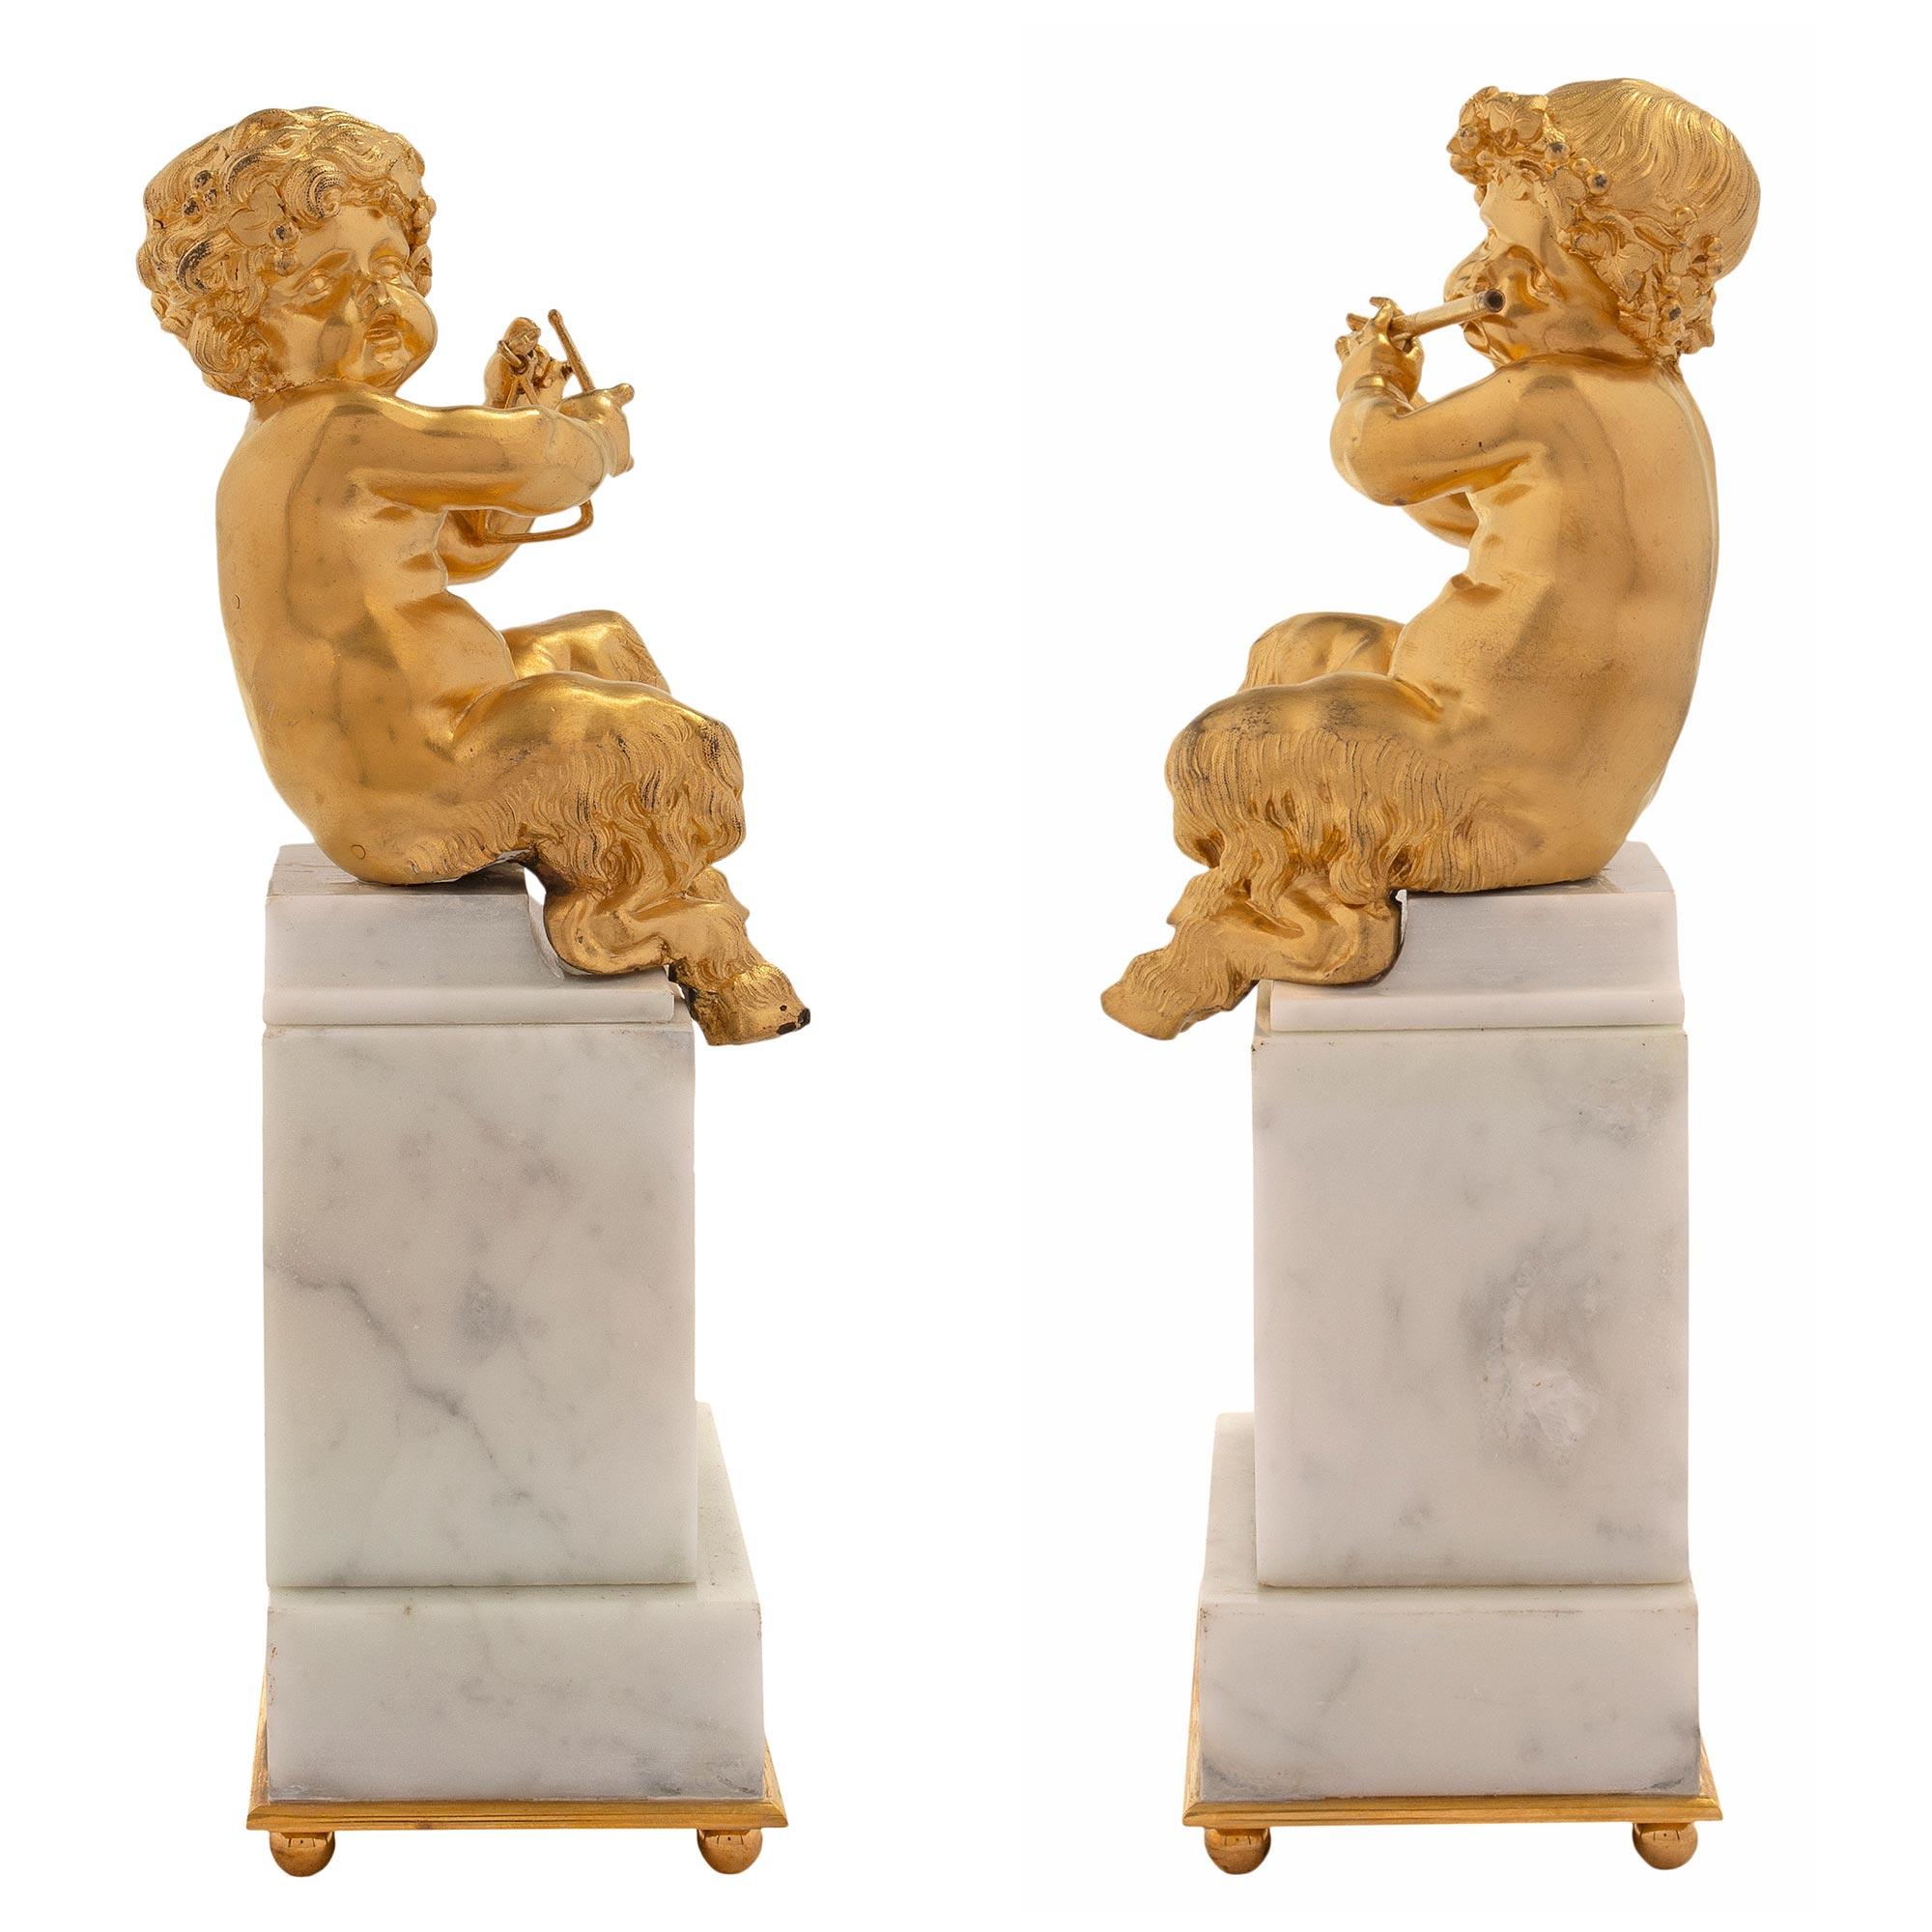 An absolutely charming pair of French mid 19th century Louis XVI st. ormolu and white Carrara marble statues of young cherubs. The pair are raised by a rectangular marble base above an ormolu socle with ball feet. One of the cherubs is playing the